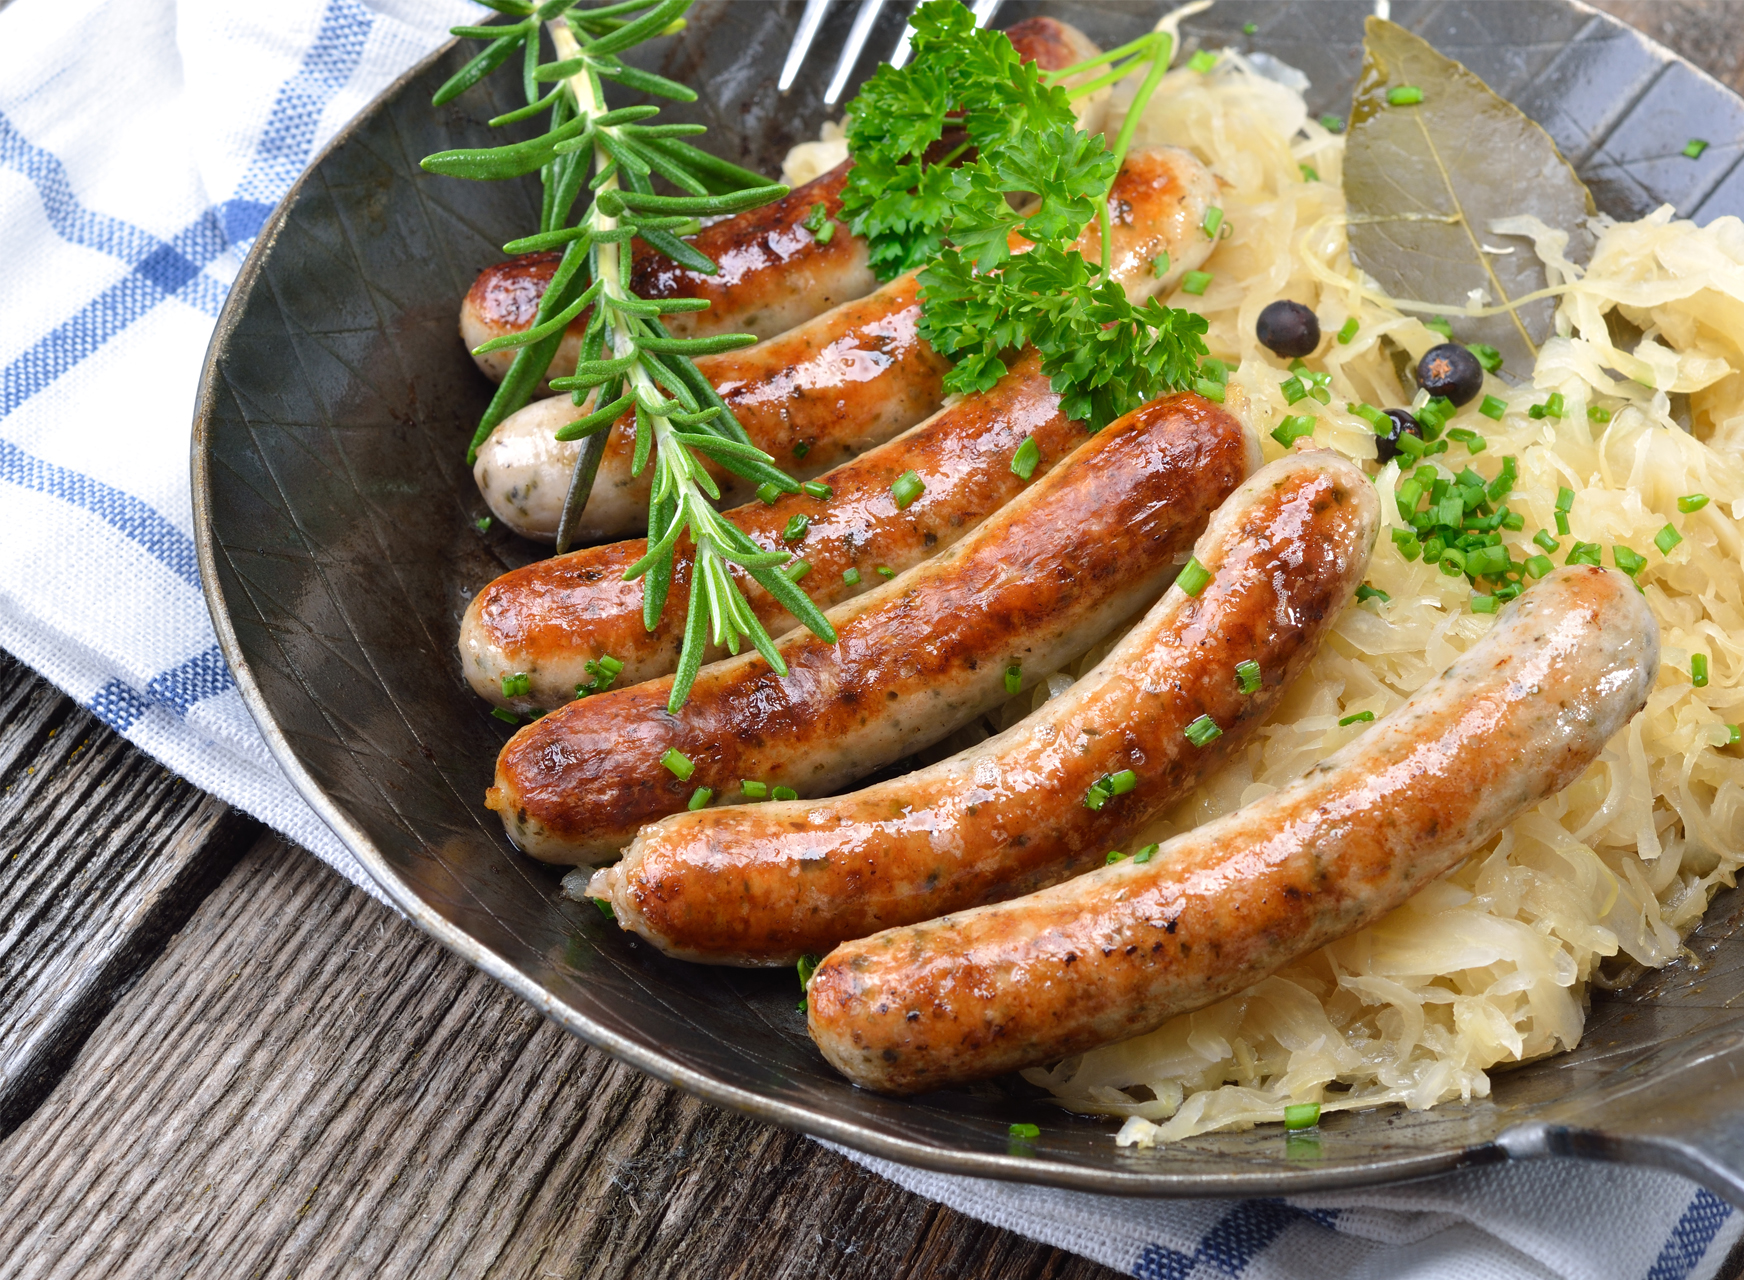 10 Most Popular German Meat Dishes